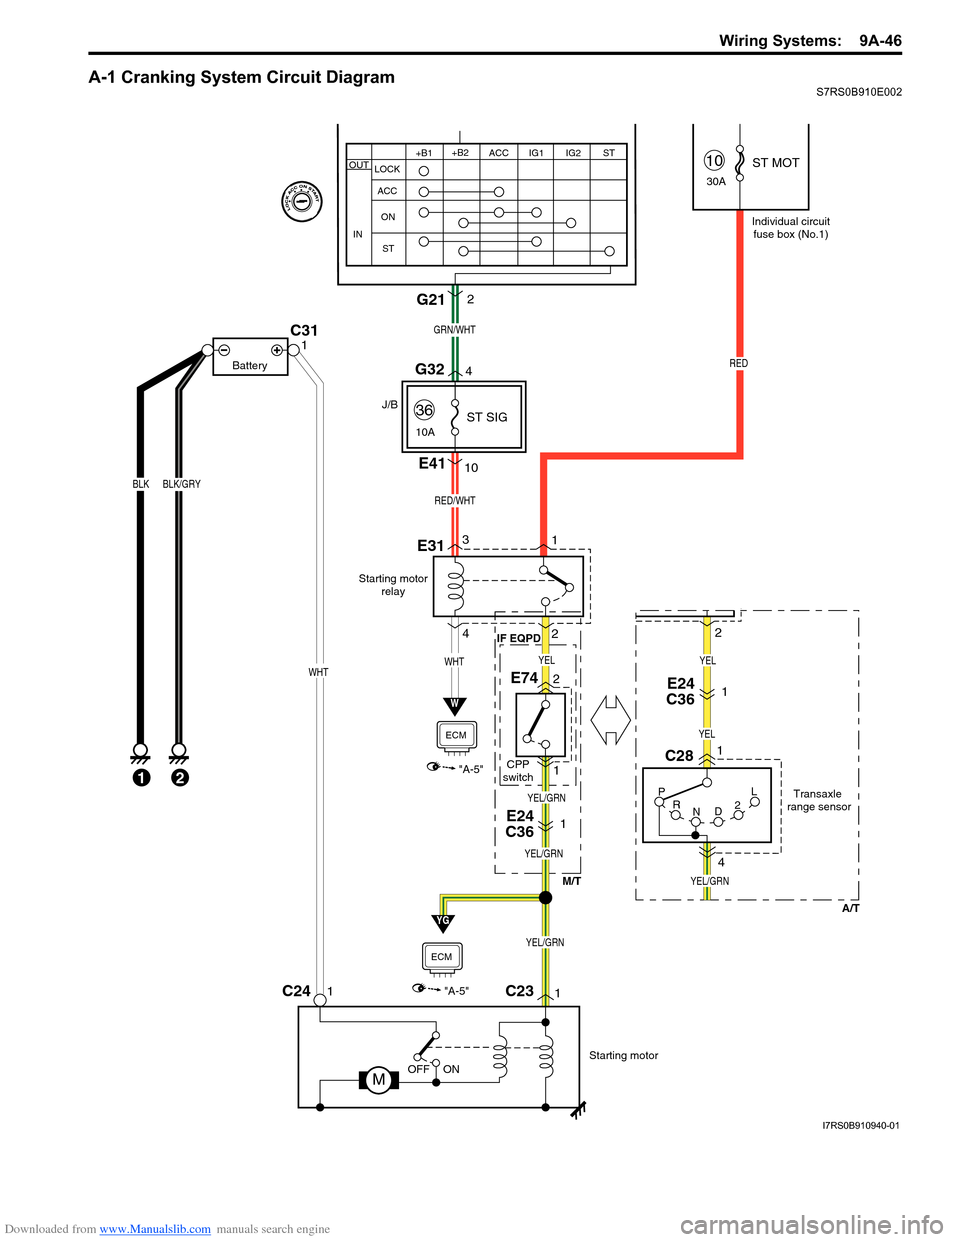 SUZUKI SWIFT 2008 2.G Service User Guide Downloaded from www.Manualslib.com manuals search engine Wiring Systems:  9A-46
A-1 Cranking System Circuit DiagramS7RS0B910E002
Starting motorrelay 
W
"A-5"
ECM
P
R N D2LTransaxle 
range sensor
C28
E